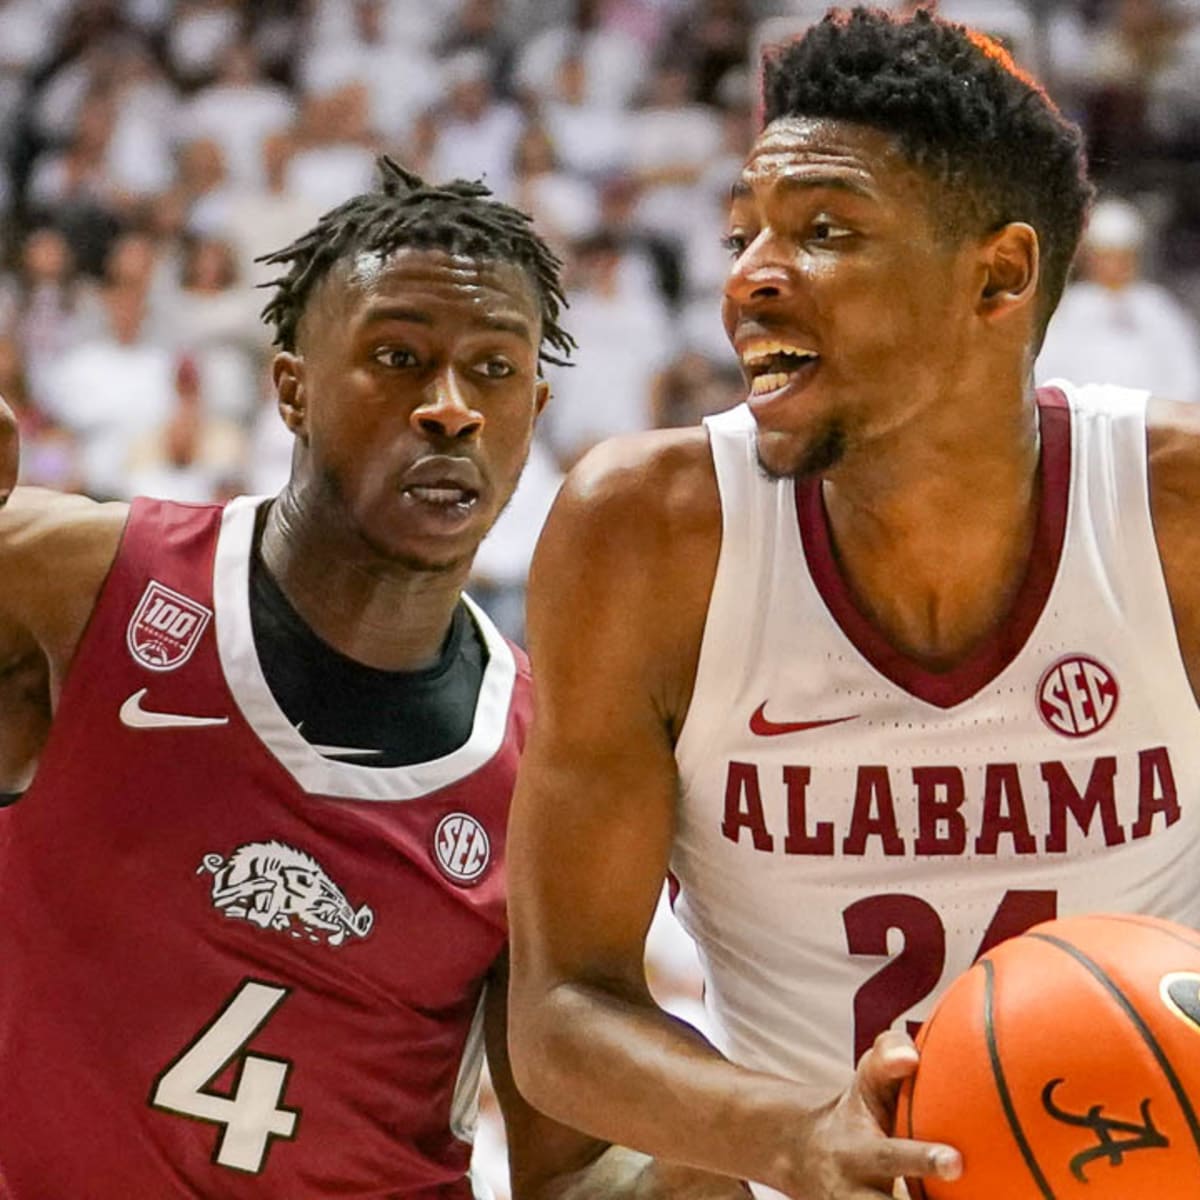 Coaches, Writers Name Brandon Miller SEC Player and Freshman of the Year -  Sports Illustrated